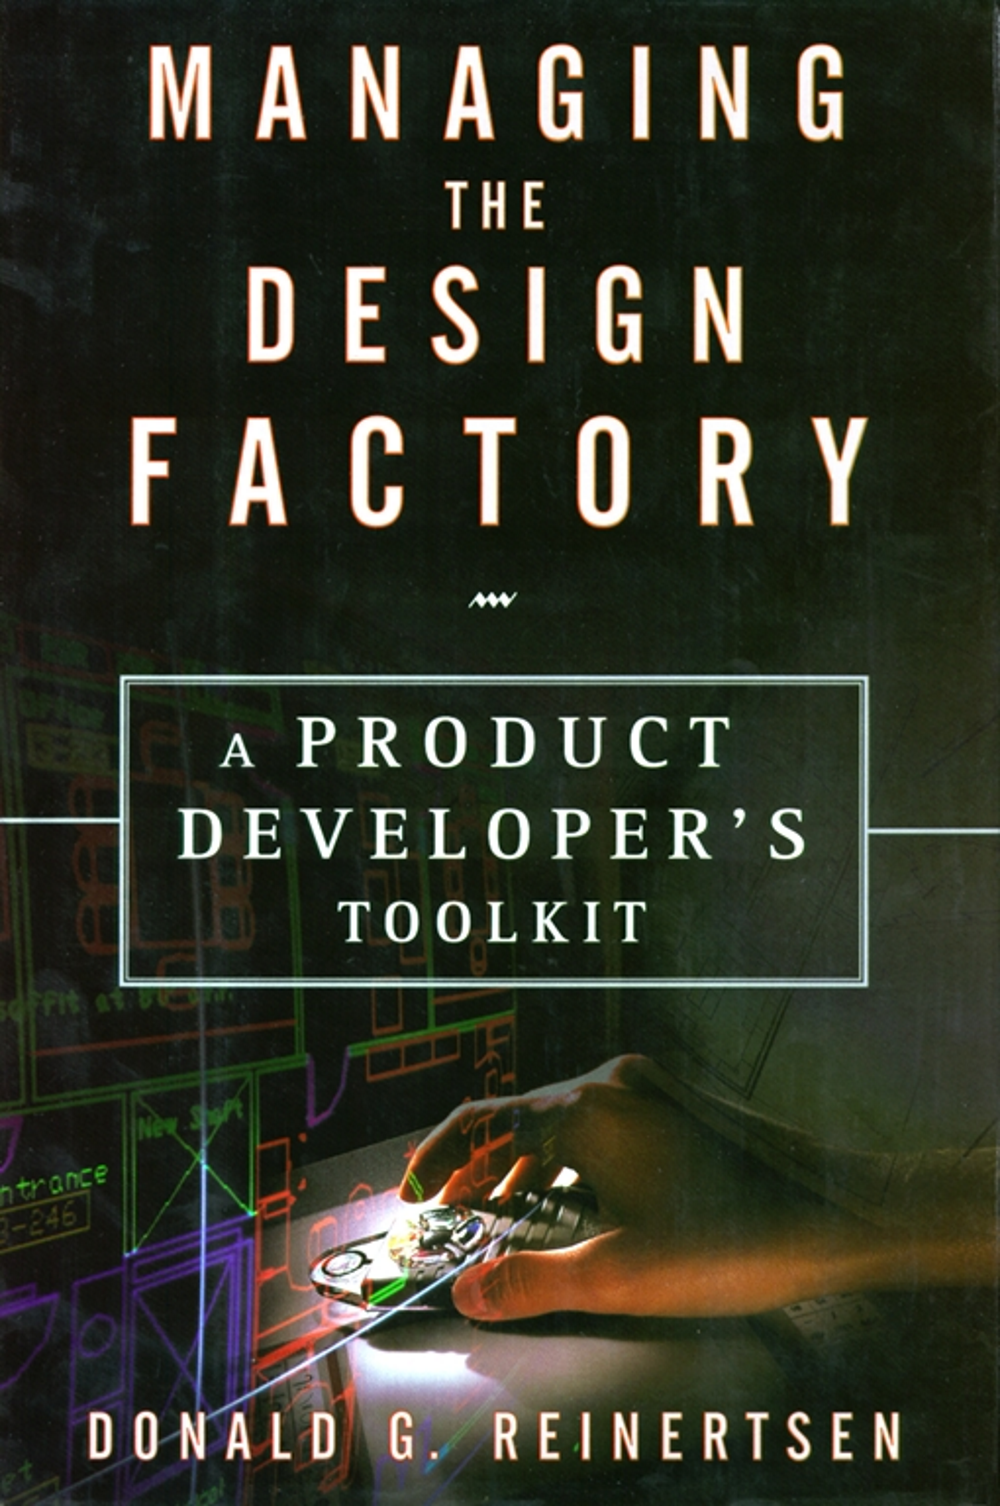 Managing the Design Factory cover has hand controlling digital technology